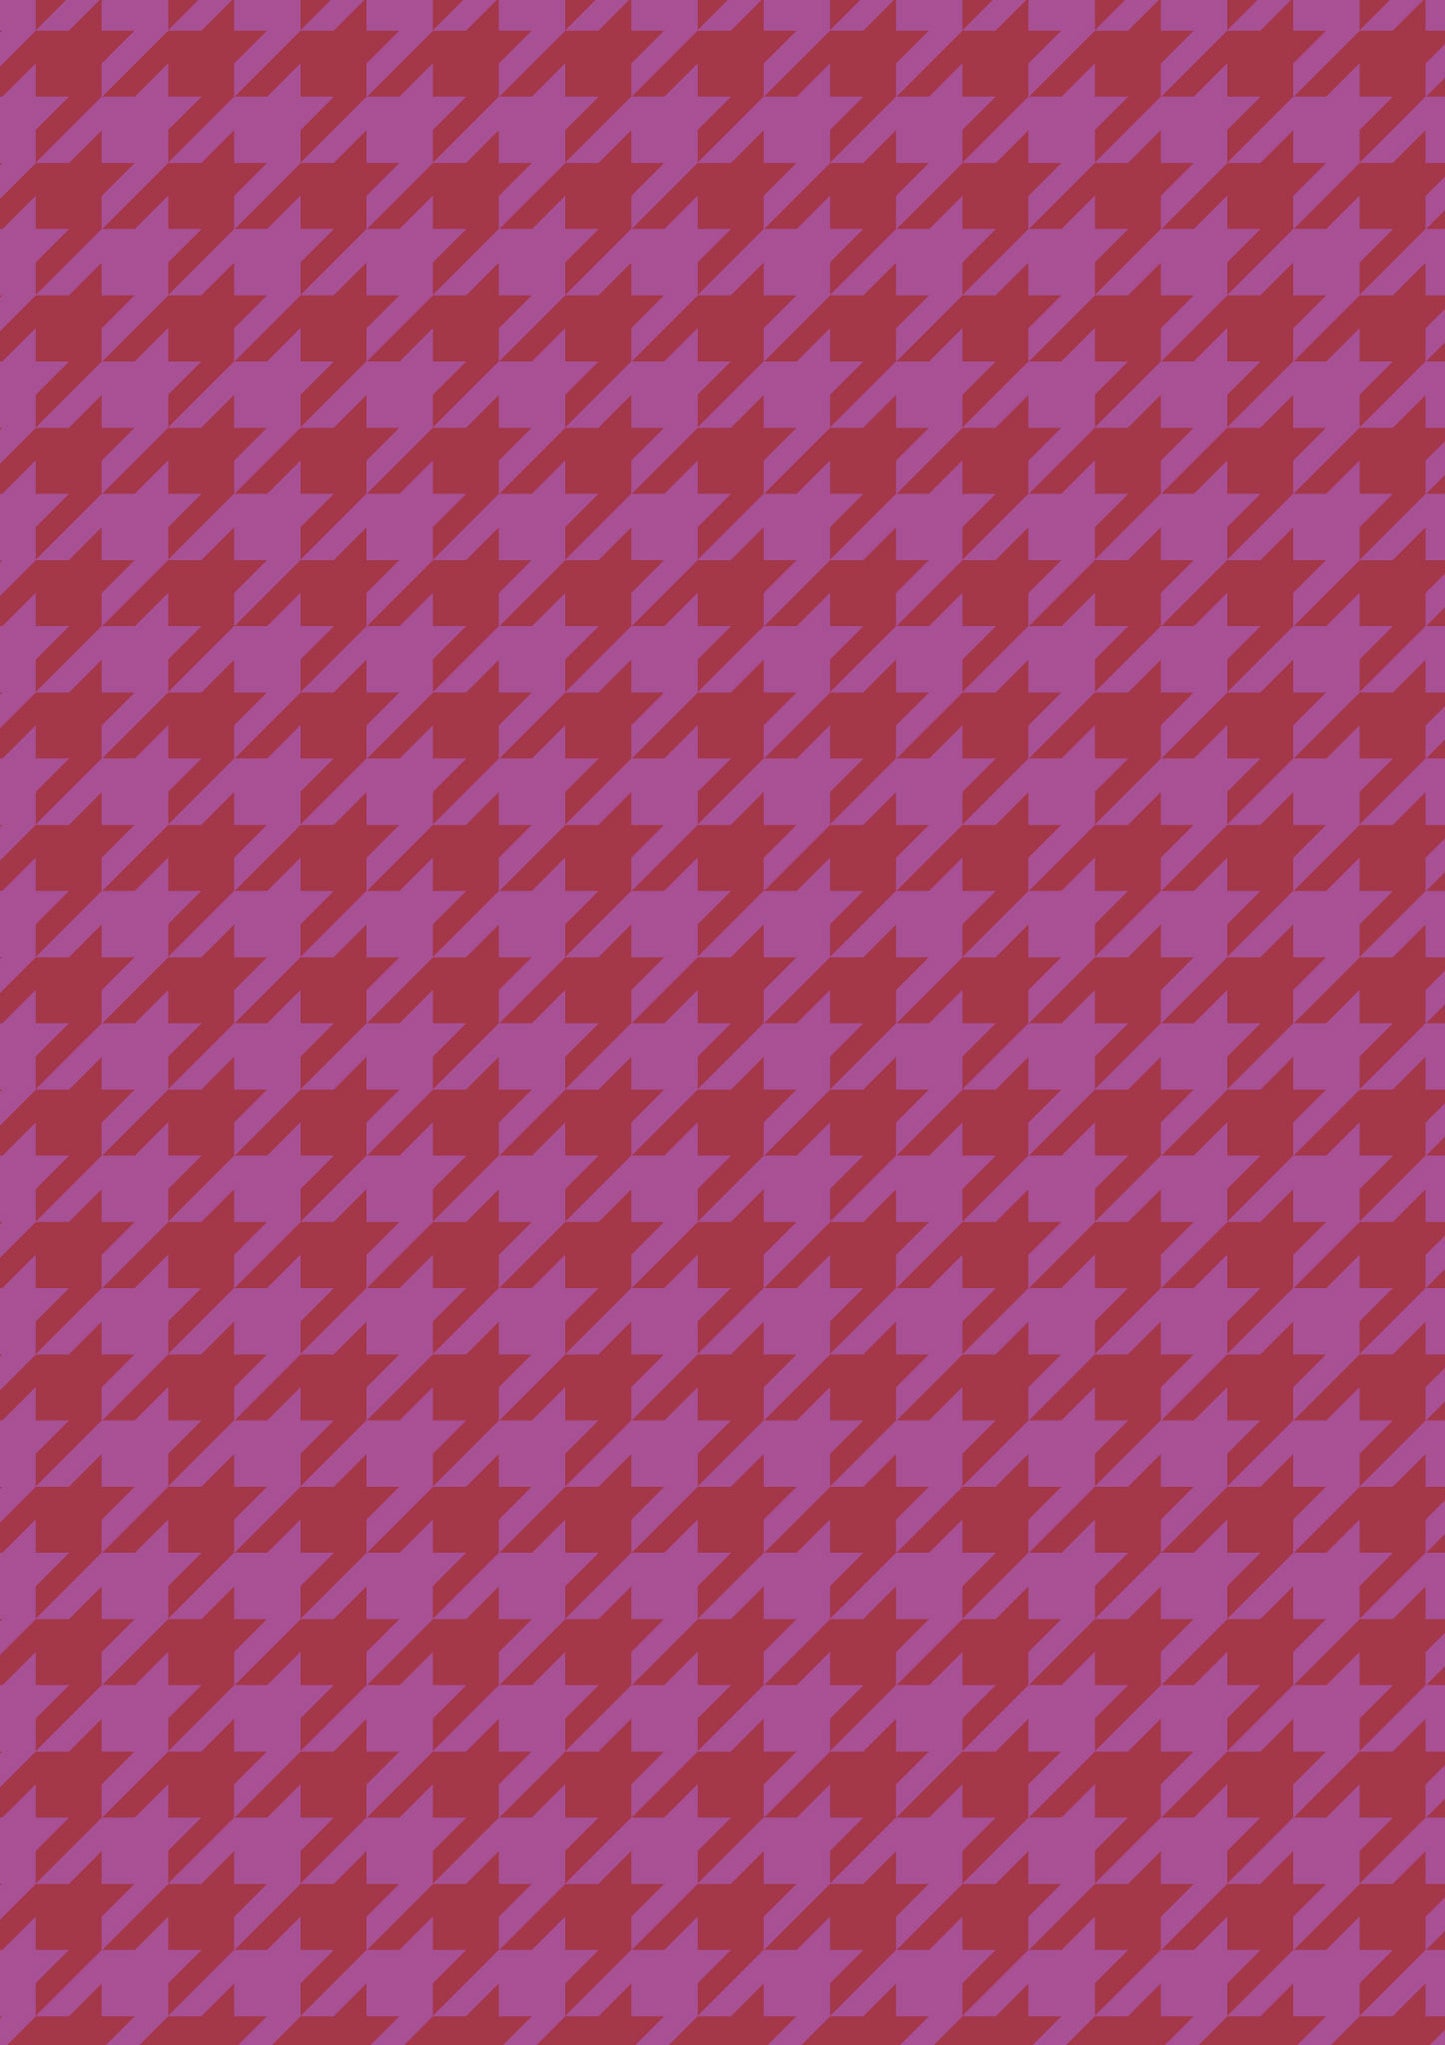 Magenta and Crimson A1 Photography Backdrop - Houndstooth